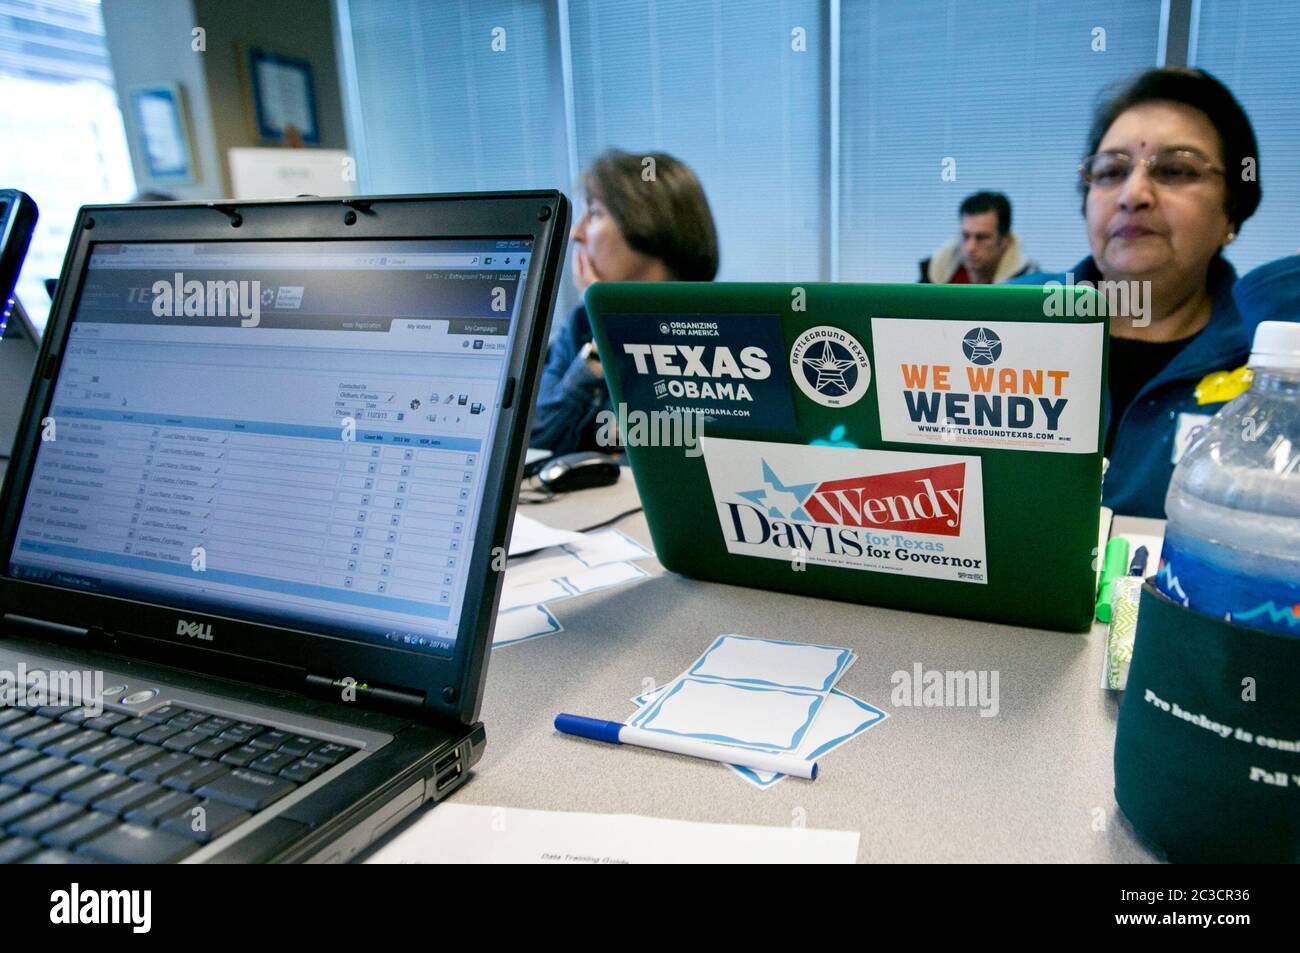 Austin Texas USA, Nov. 23 2013: Volunteers for Battleground Texas and the state Democratic Party make phone calls to potential voters in an attempt to 'turn Texas blue.' Democratic state Sen. Wendy Davis has announced she will run for governor, but she faces an uphill battle as  Texas has been a solidly 'red' Republican state for almost 20 years. ©MKC/Bob Daemmrich Photography, Inc. Stock Photo